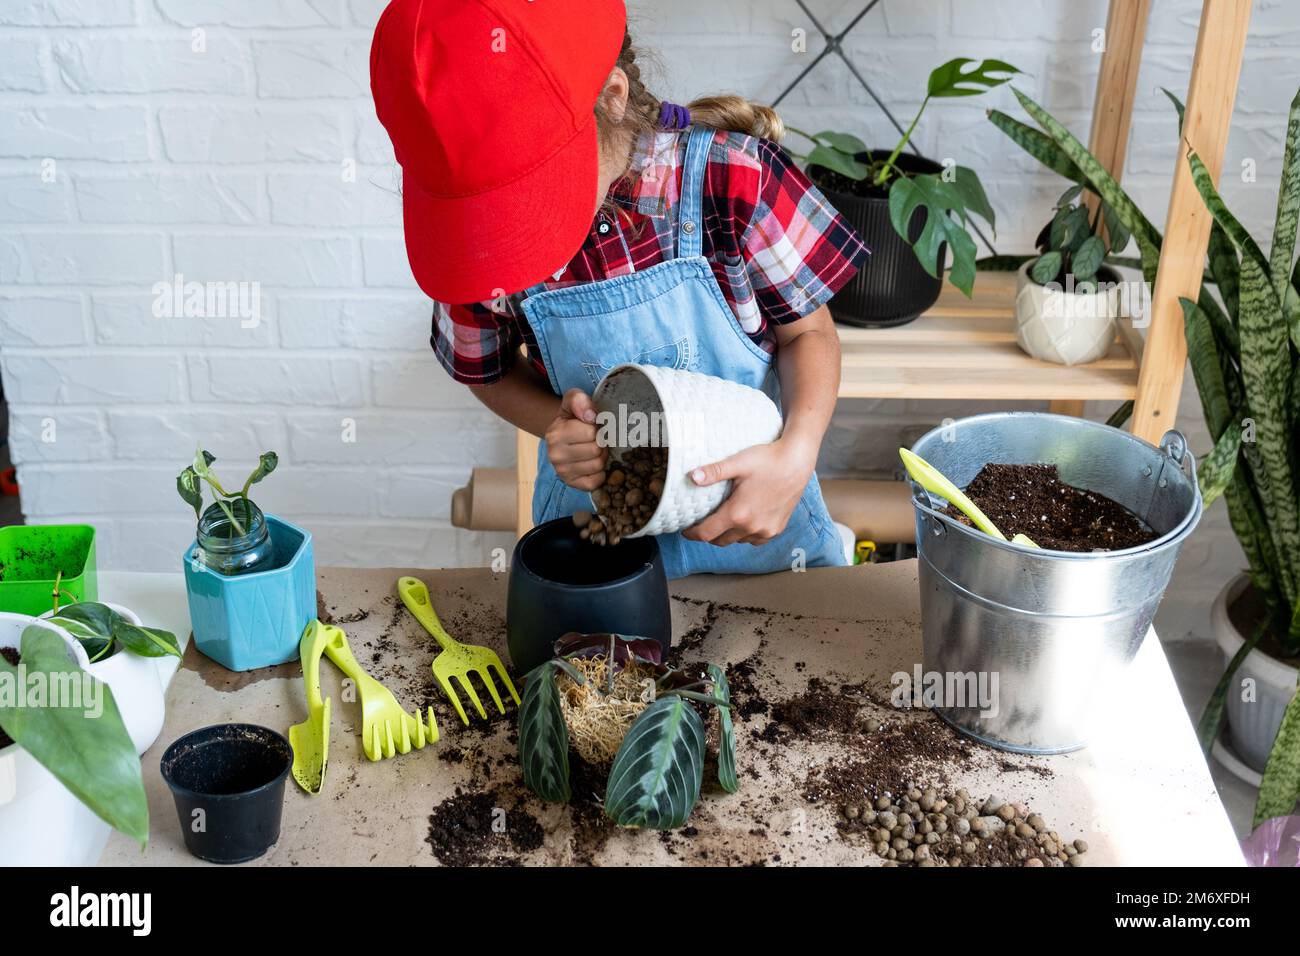 Girl replant a potted houseplant Maranta into a new soil with drainage. A rare variety Marantaceae leuconeura Massangeana Potted Stock Photo